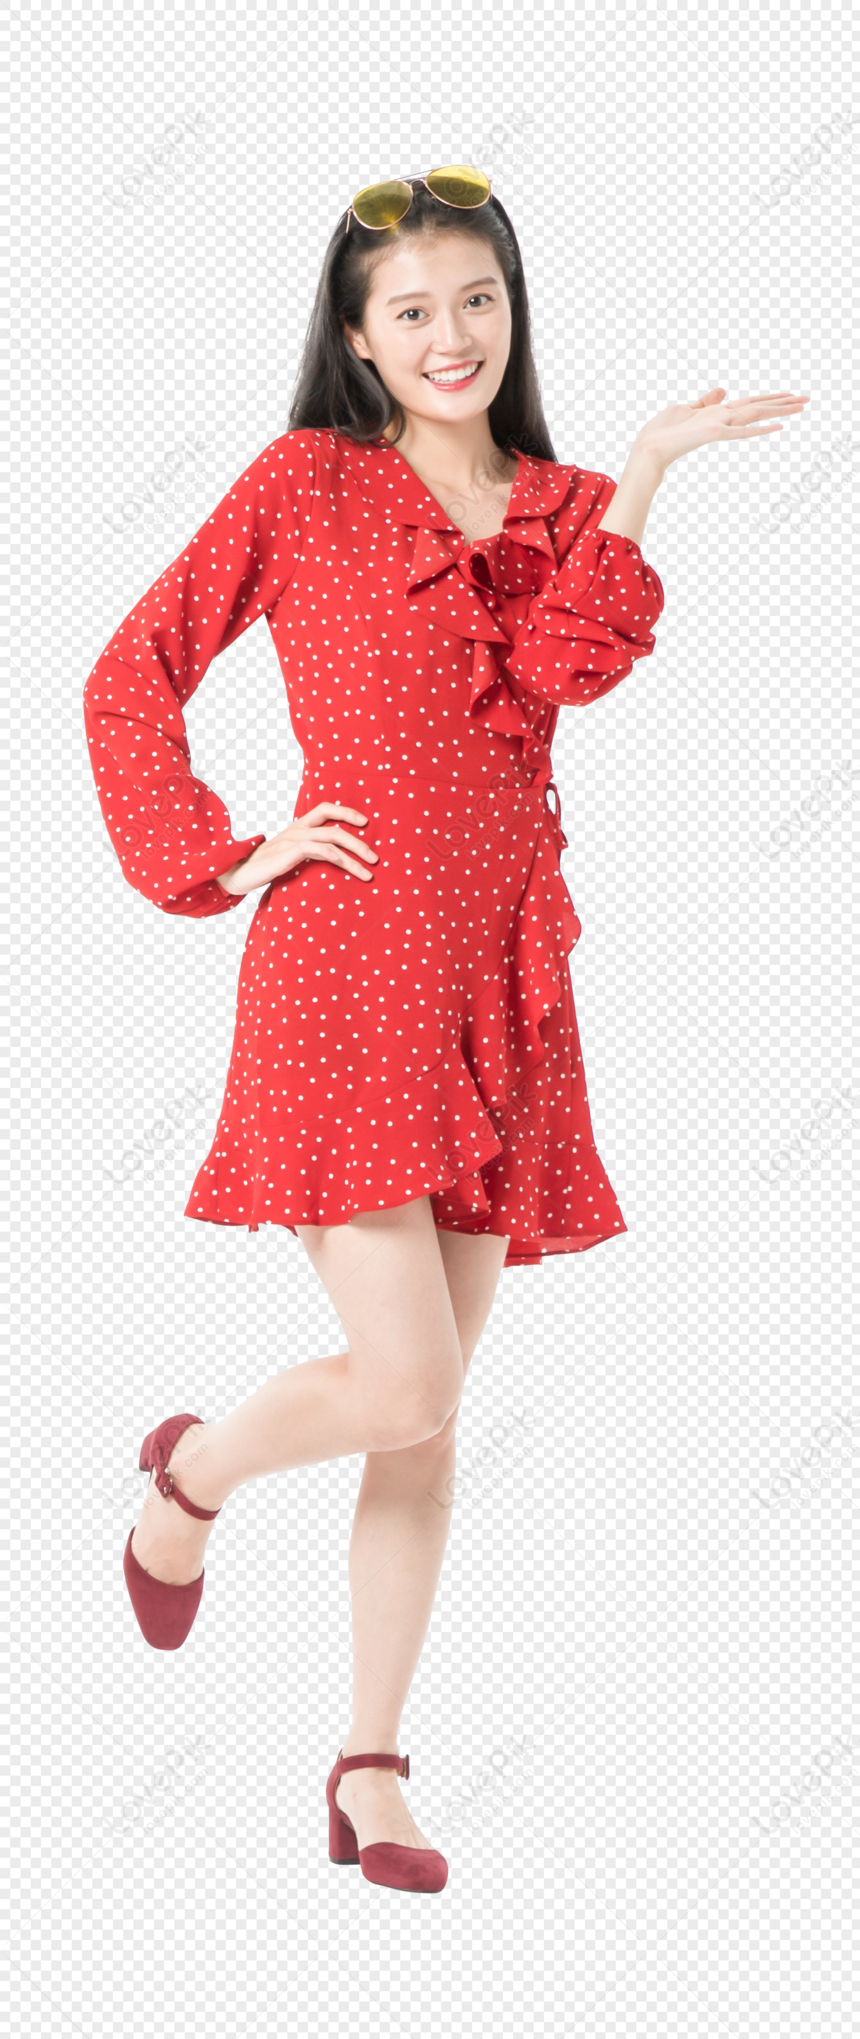 Women Shopping Carnival Red Woman Posing Woman Dress Woman Png Image Free Download And 0784